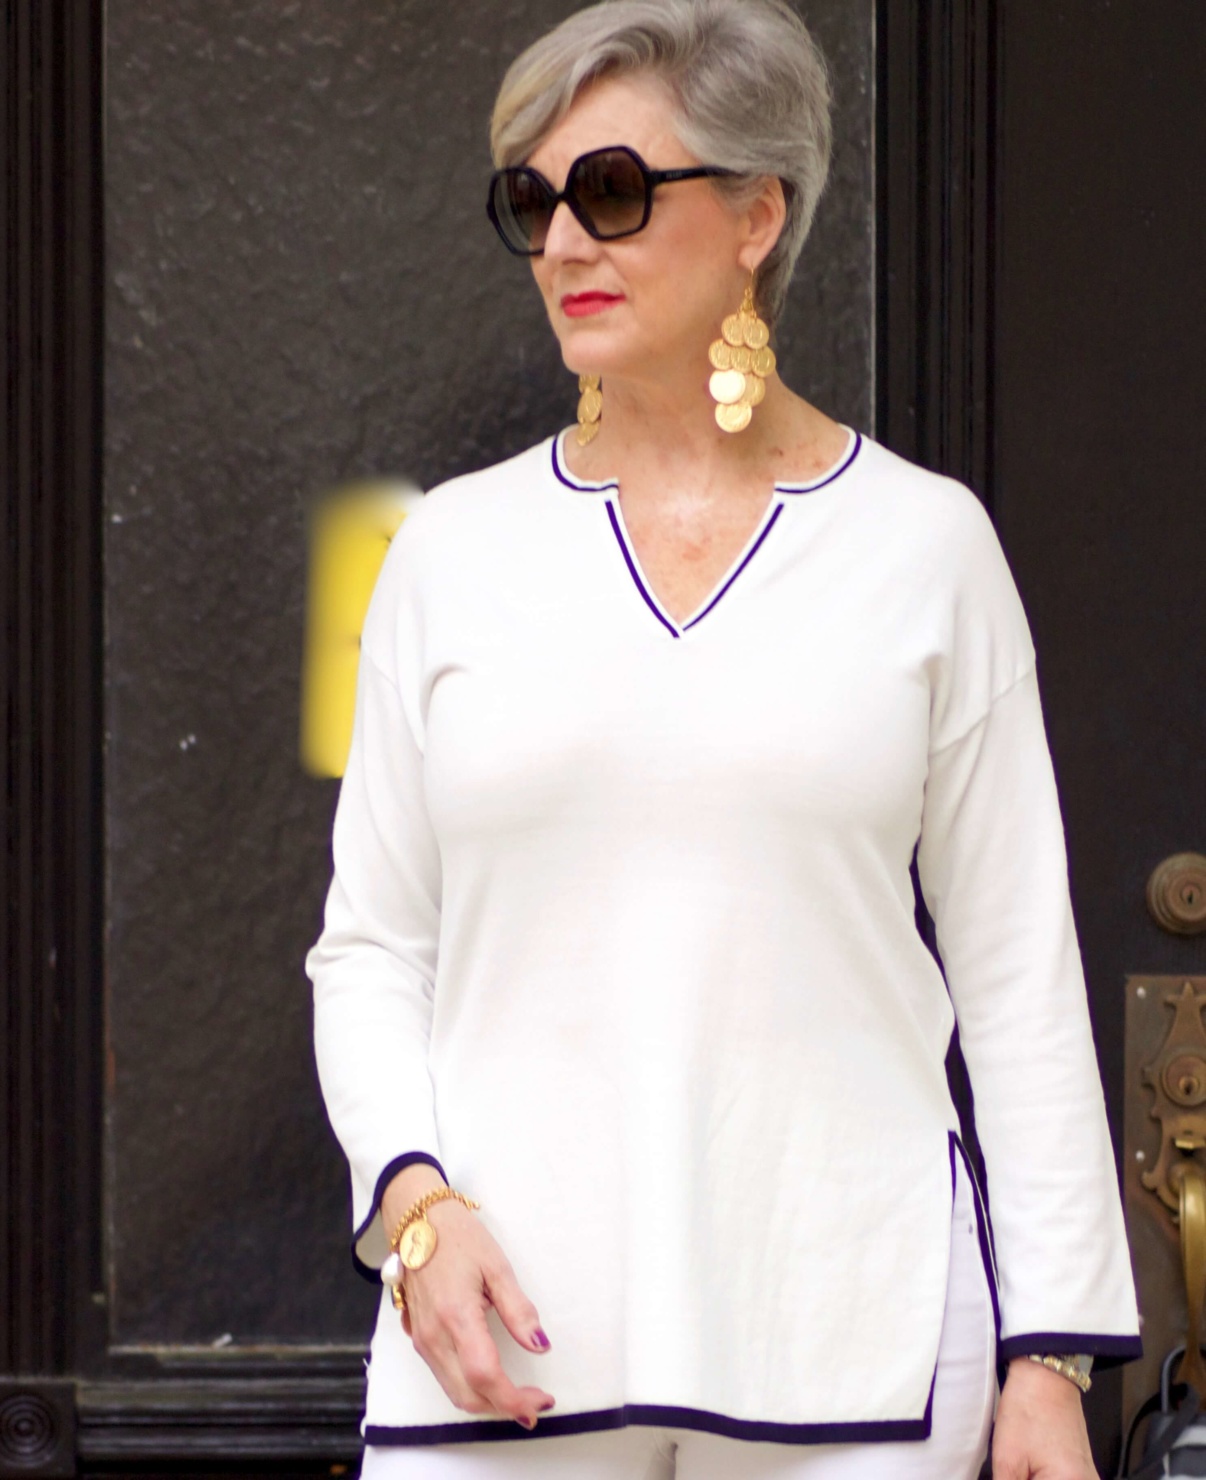 beth from Style at a Certain Age wears gold coin chandelier earrings, gold charm bracelet